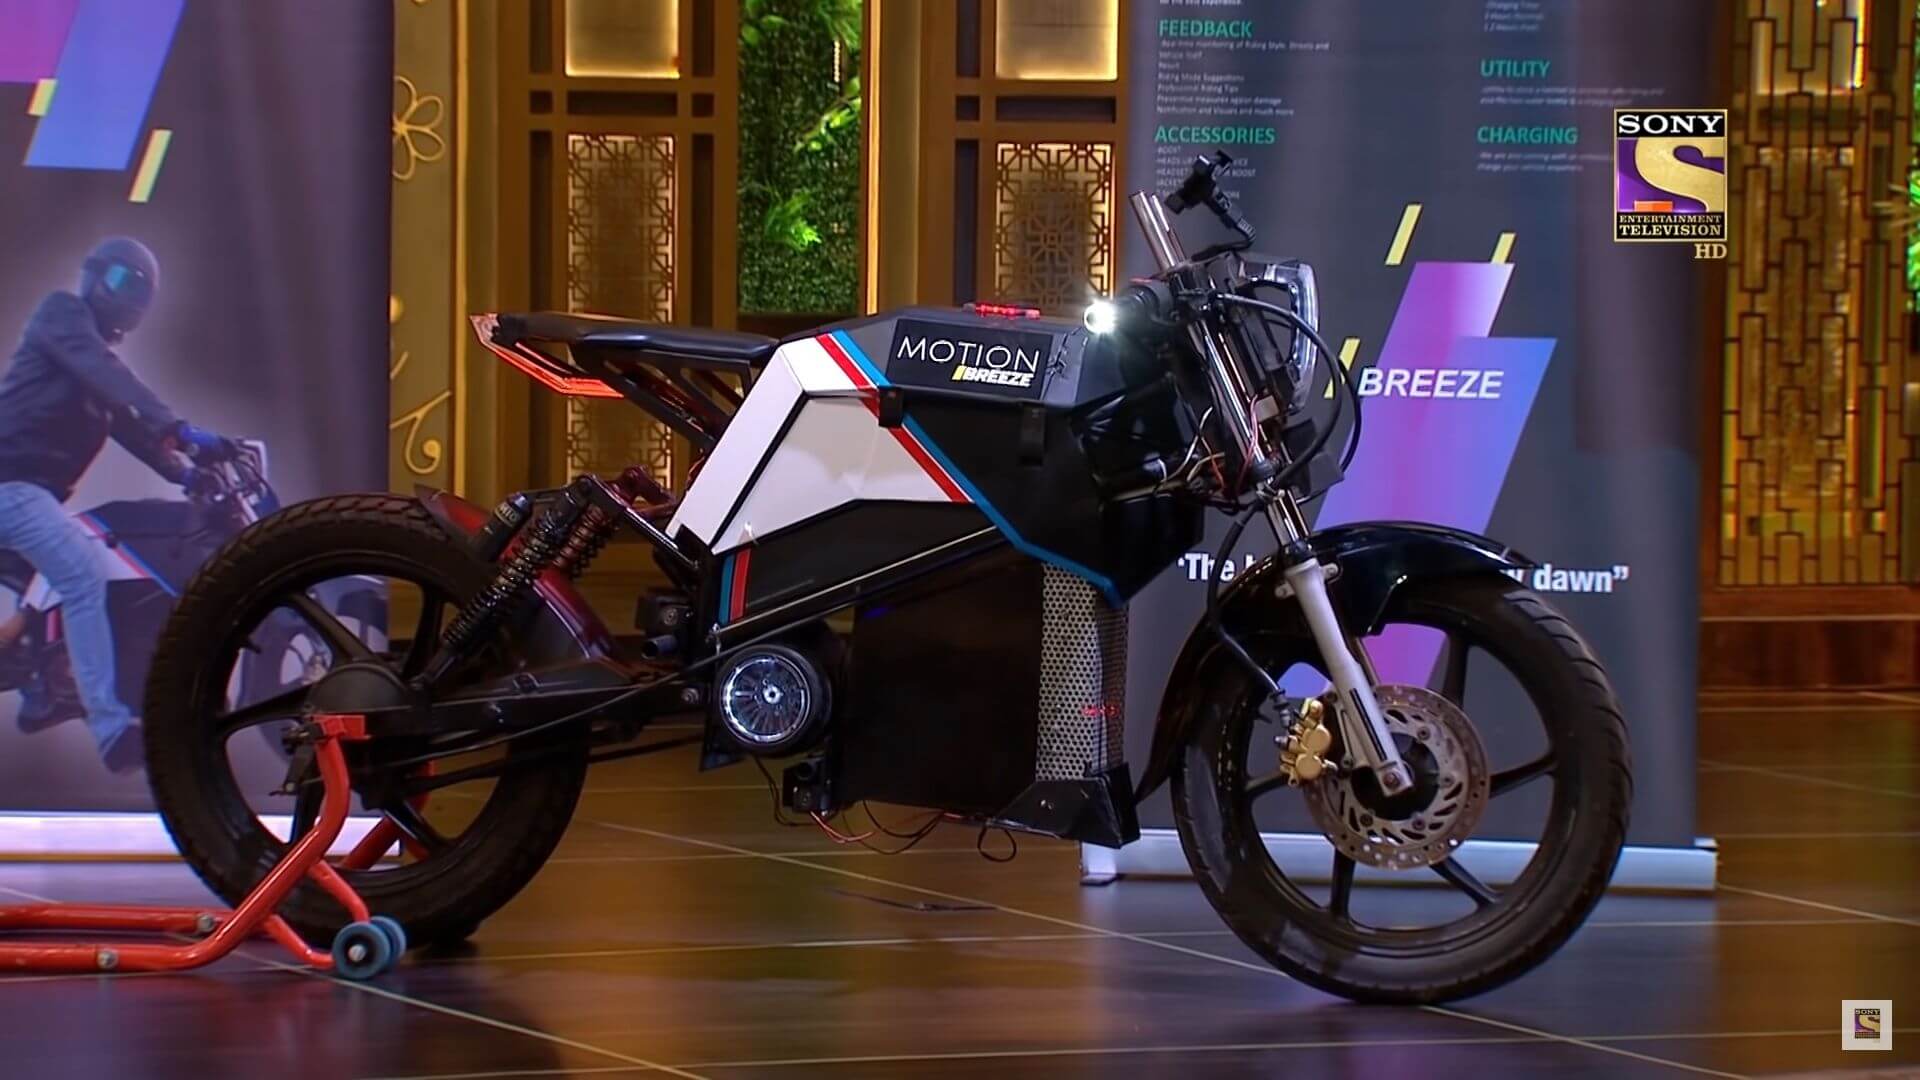 https://e-vehicleinfo.com/motion-breeze-made-in-india-electric-motorcycle-with-400km-range-price/